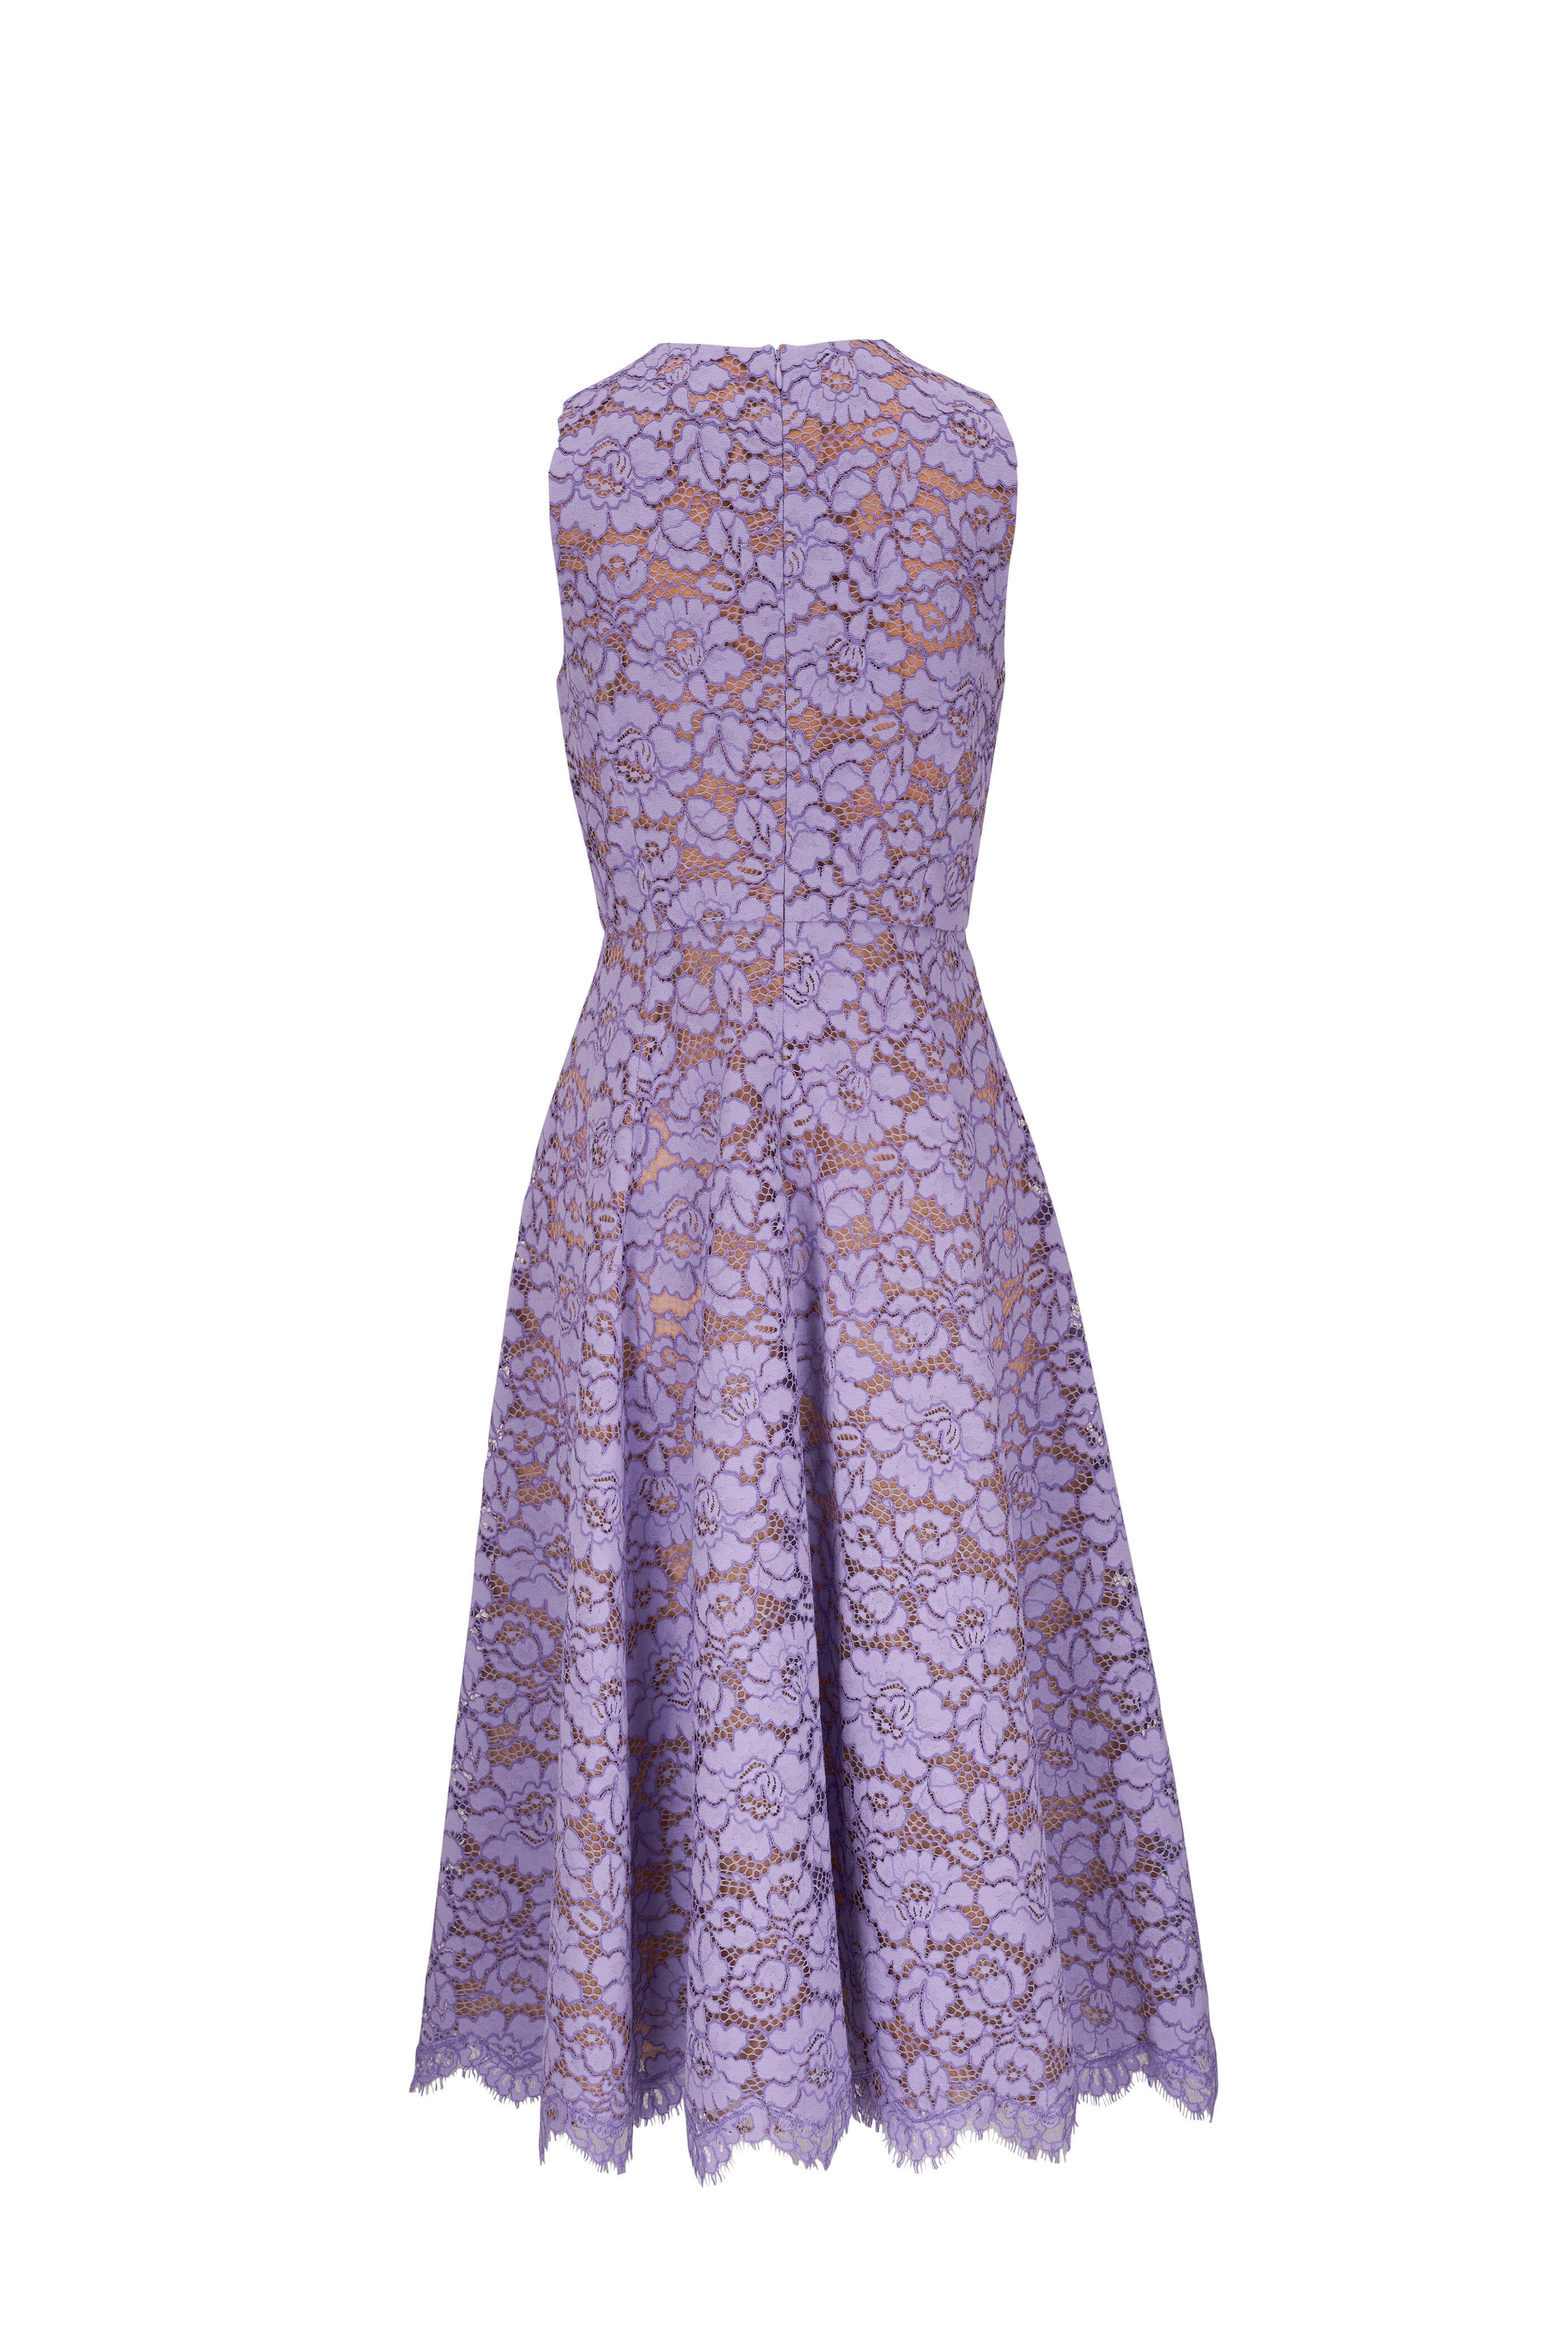 Michael Kors Collection - Freesia Floral Lace Midi Dress